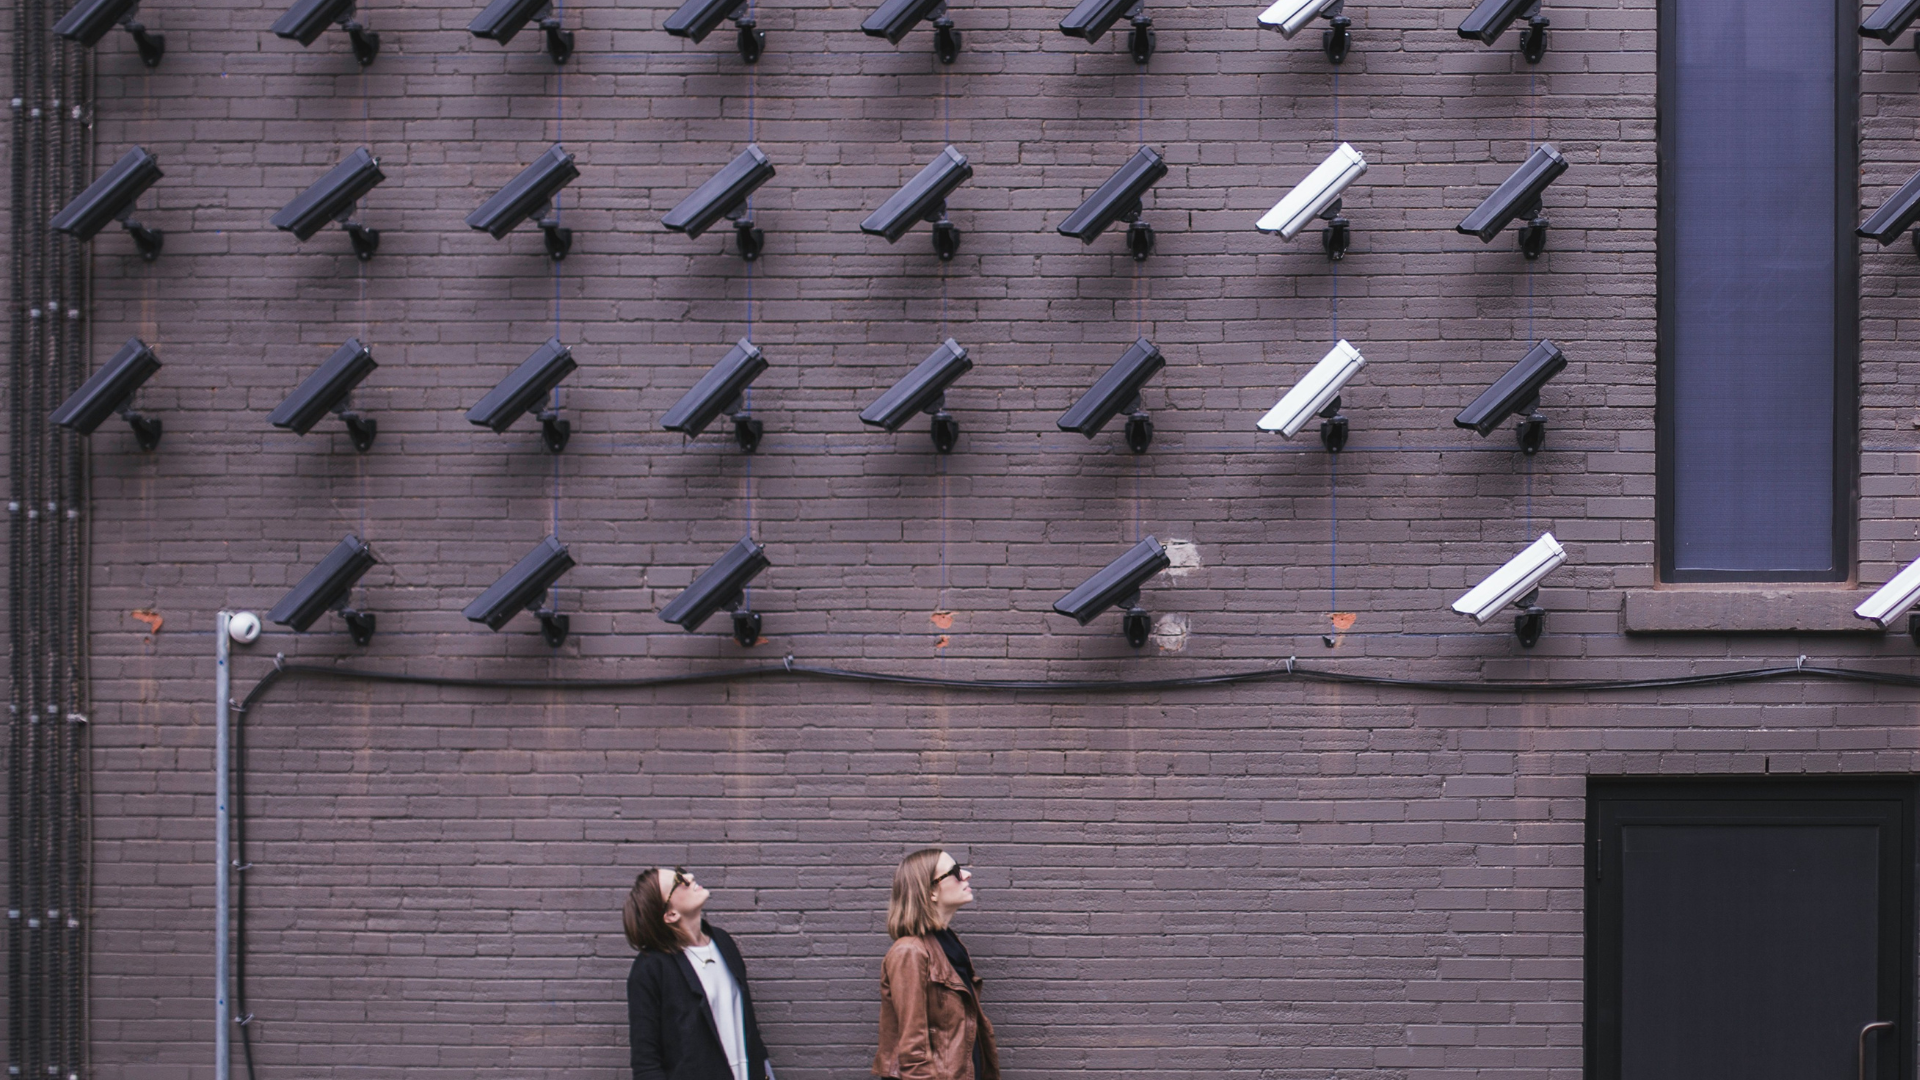 two people look up at a bank of security cameras